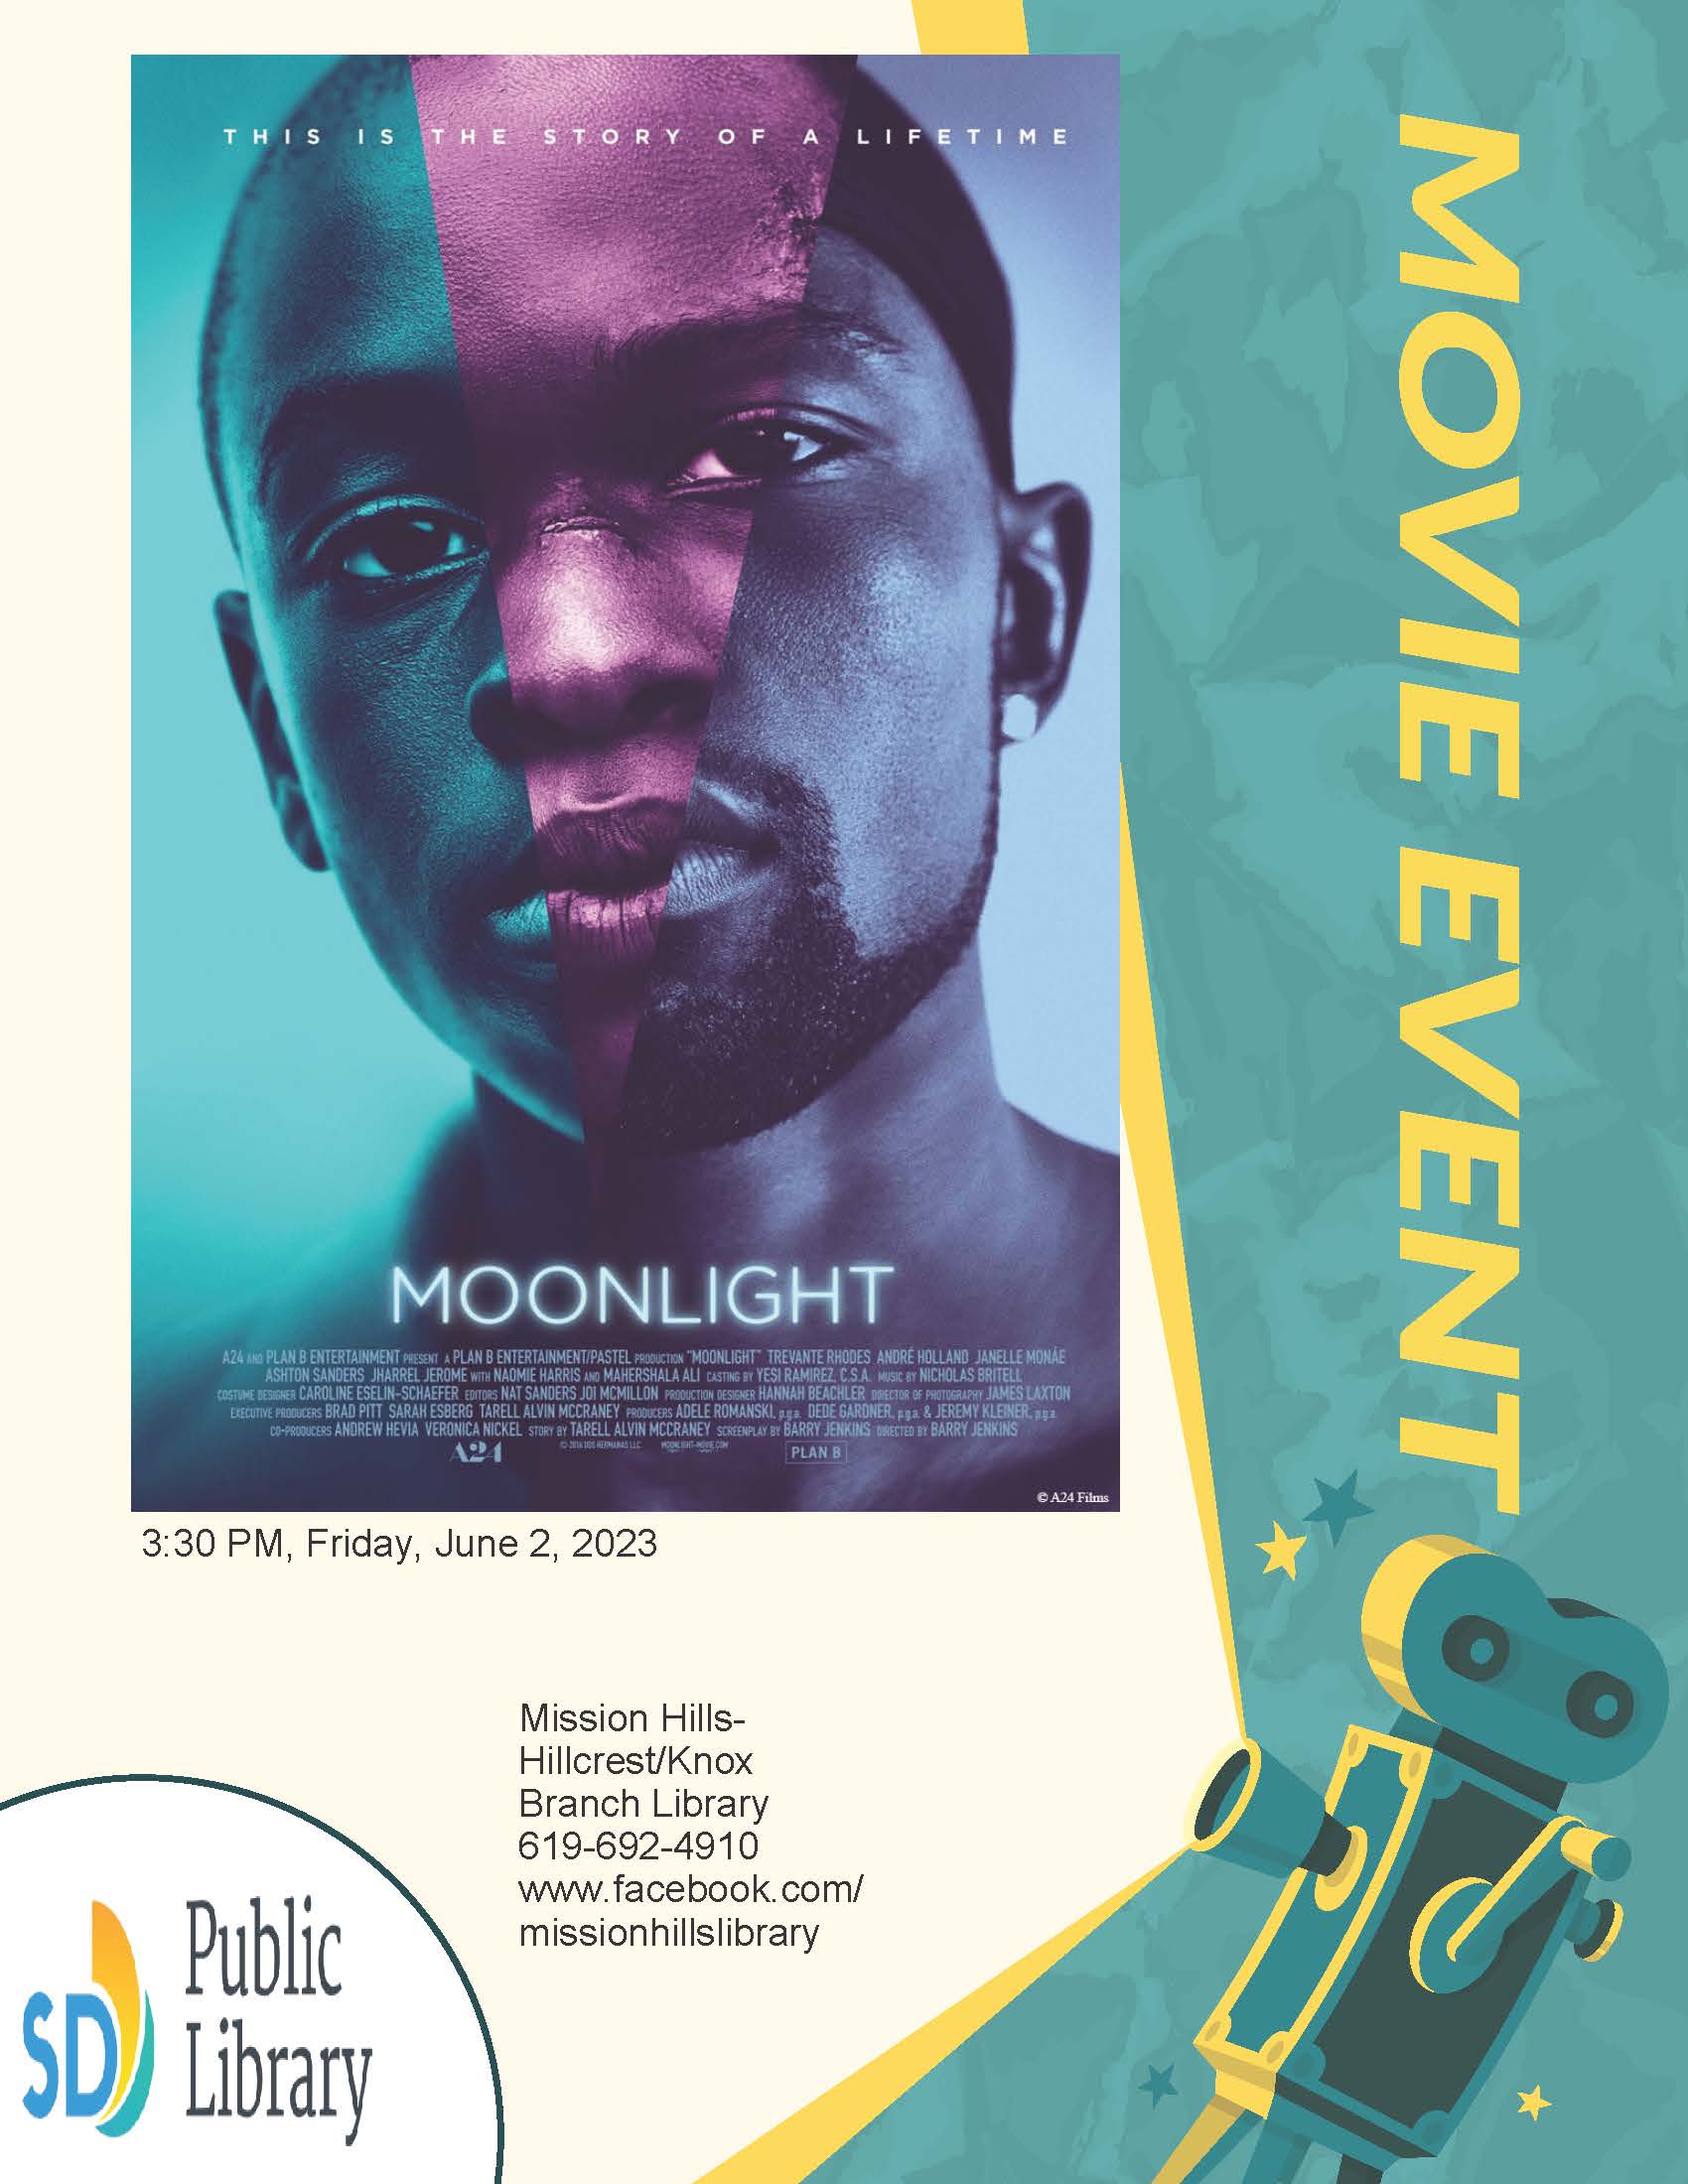 Moonlight movie poster with injured African American man